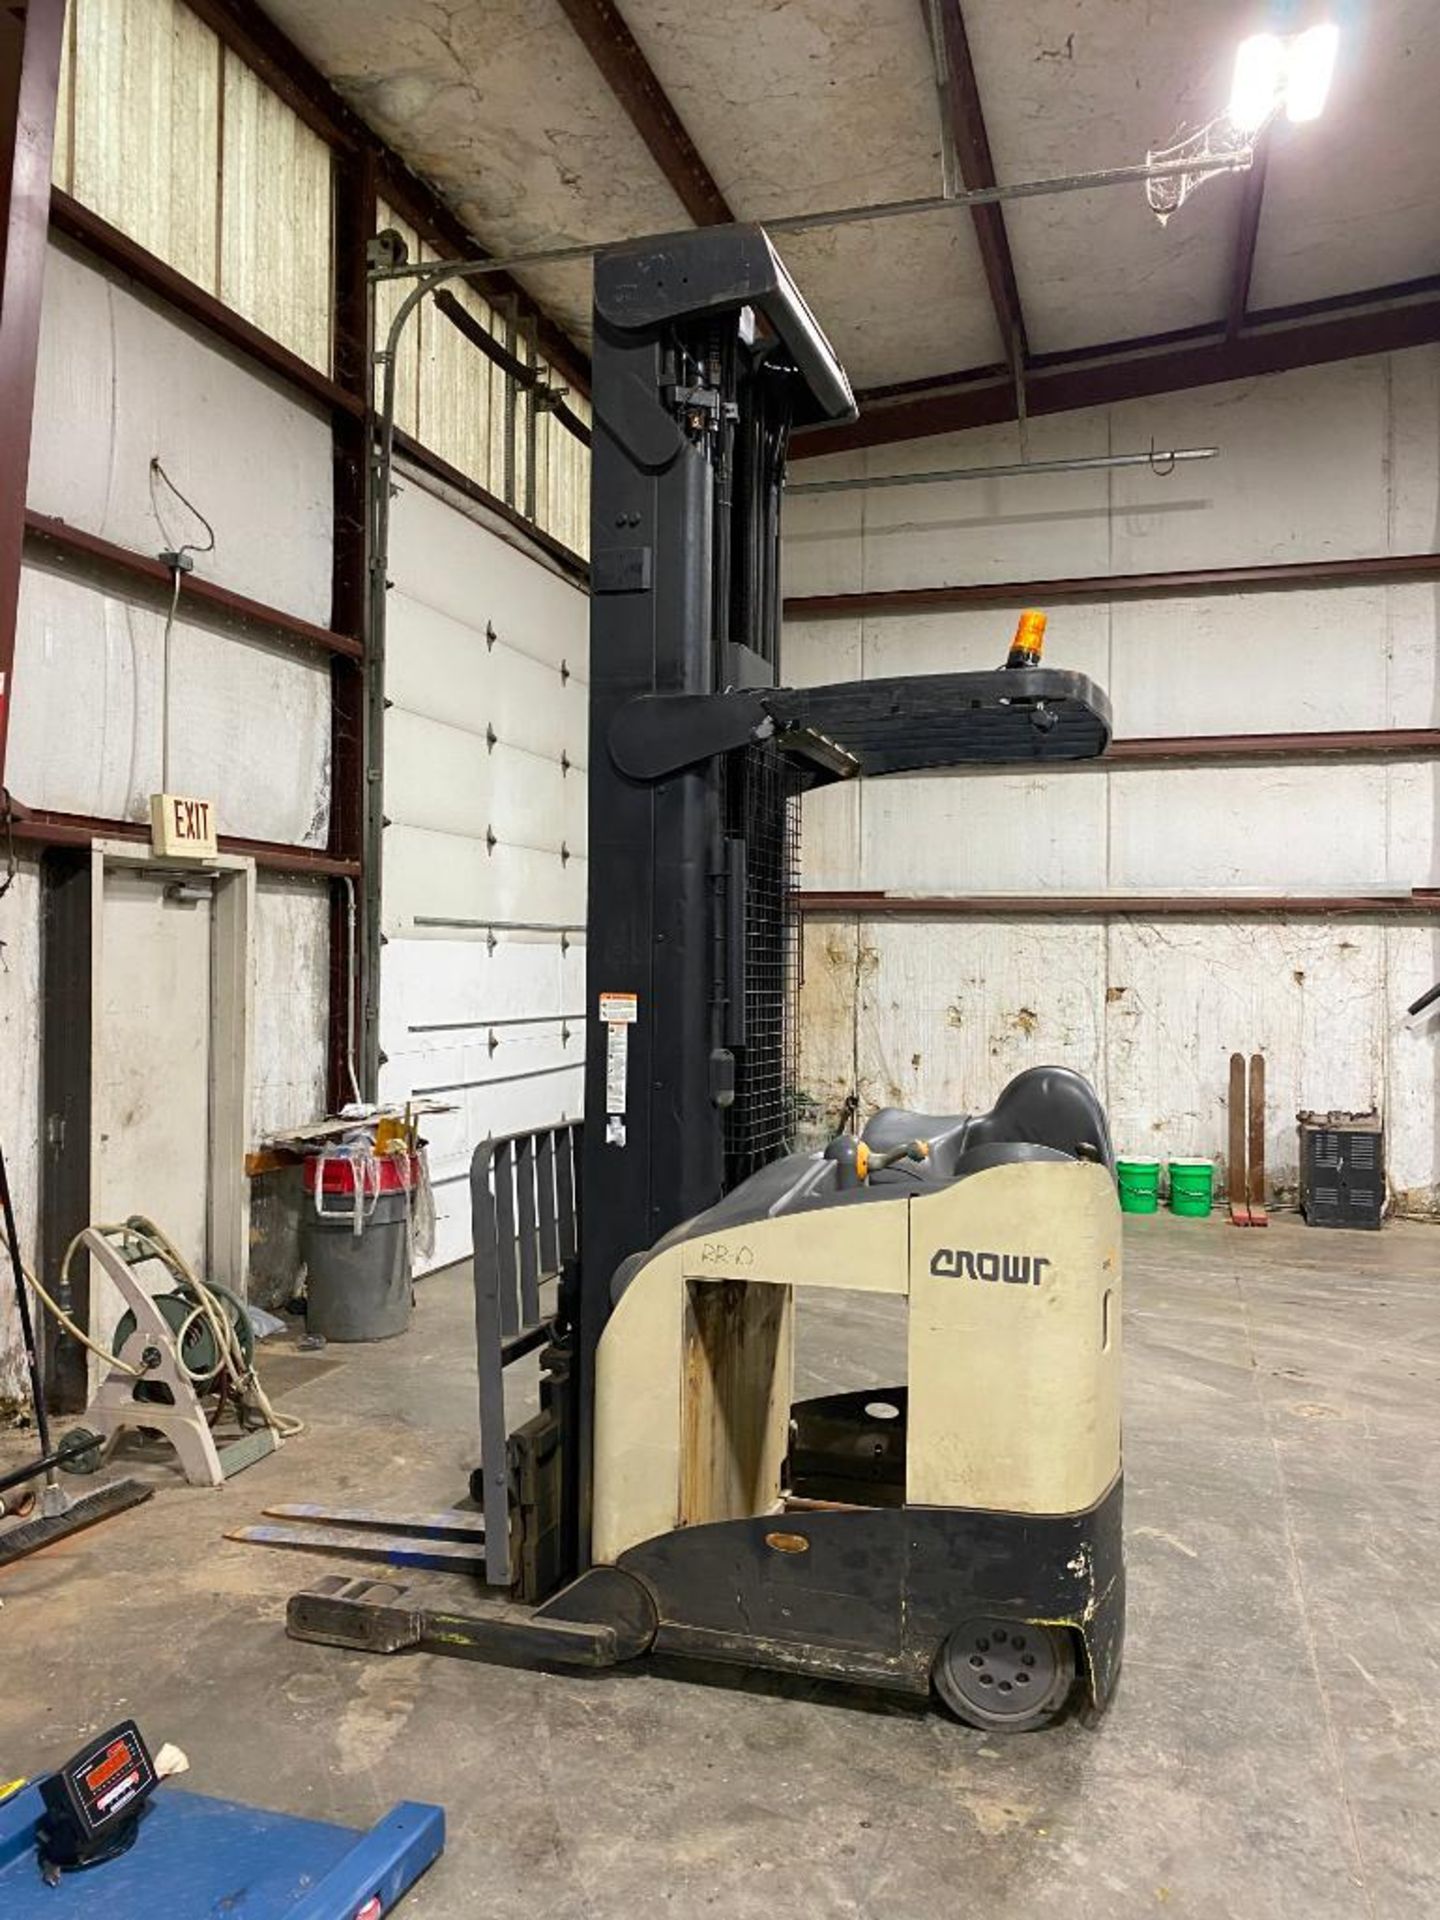 393C Crown 4,500 Lb. Capacity Reach Truck, Model Rr 5725-45, S/N 1a356735, 321” Max. Lift Height, 14 - Image 3 of 6